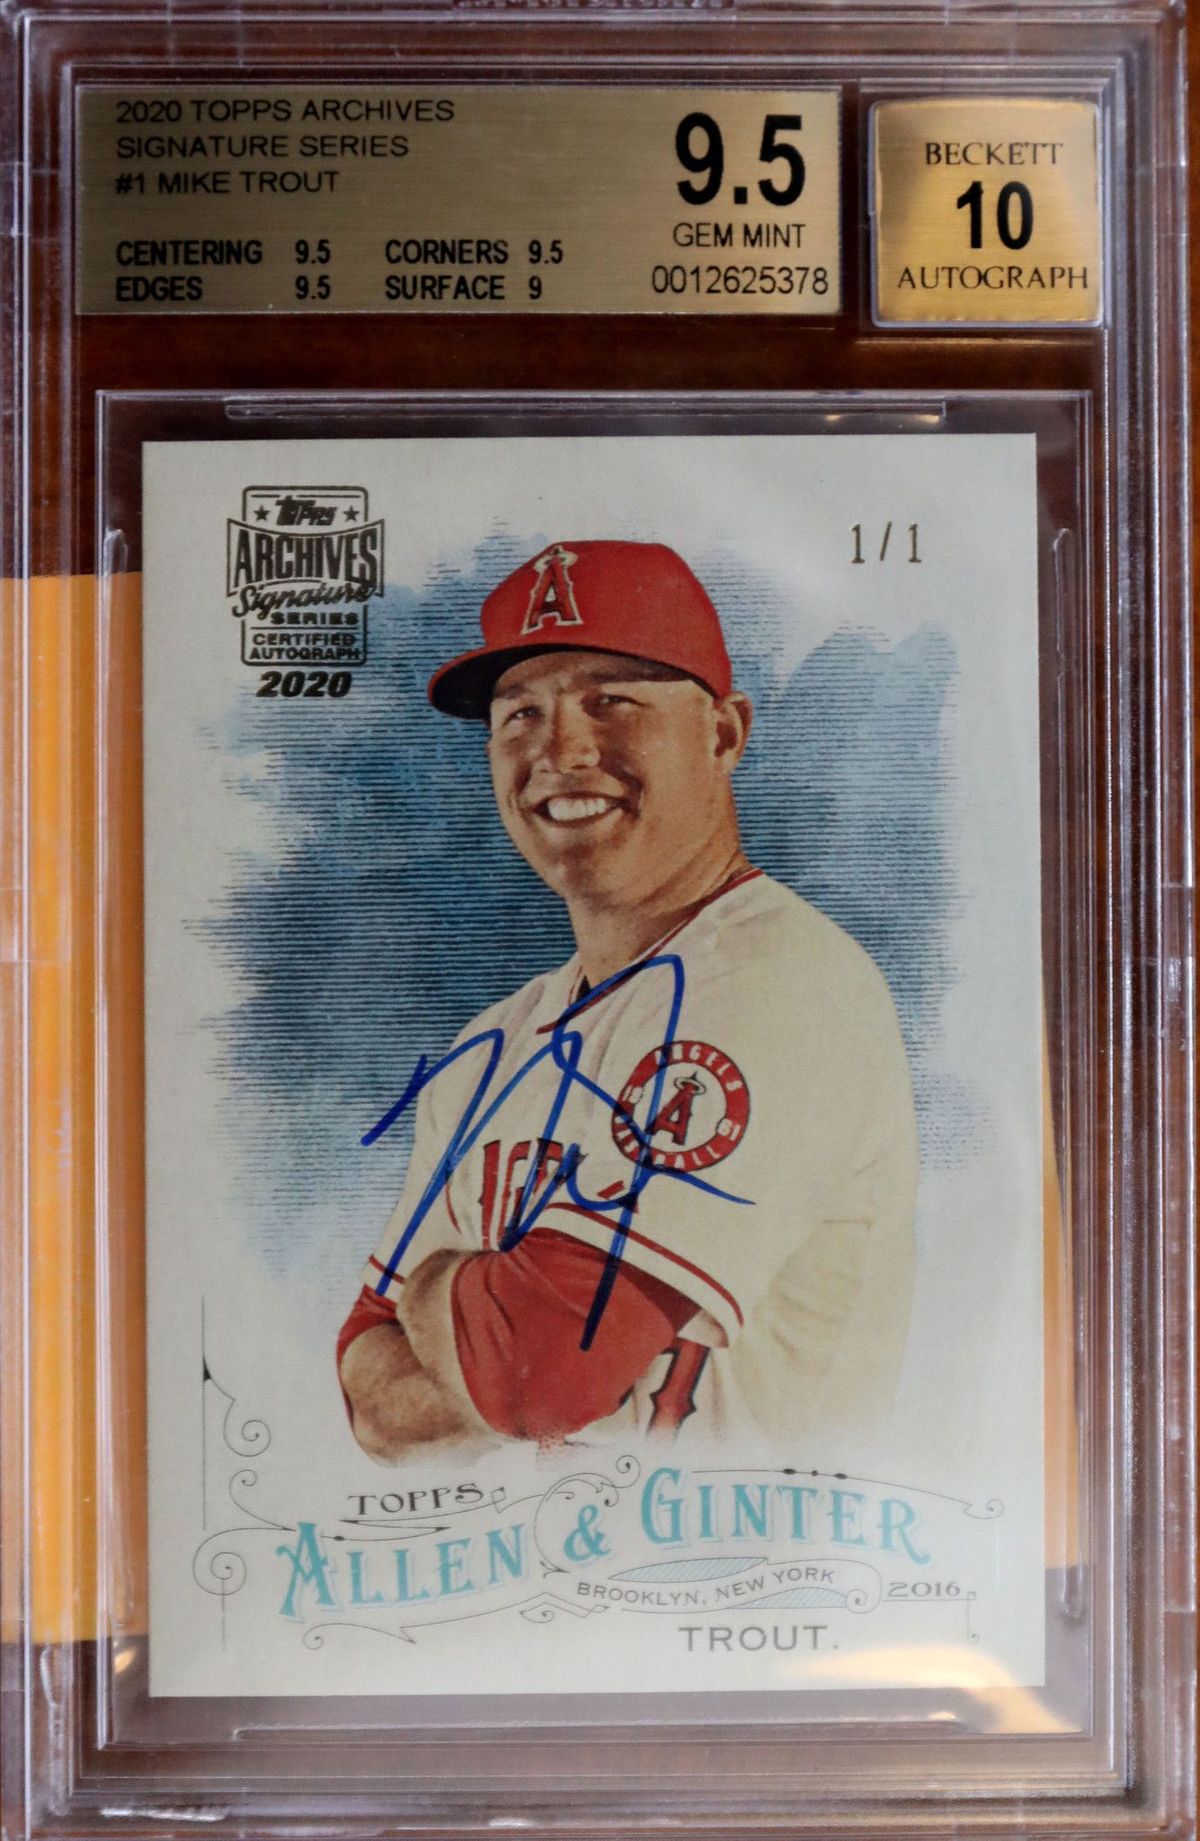 Mike Trout autographed rookie card sells for nearly $1 million at auction